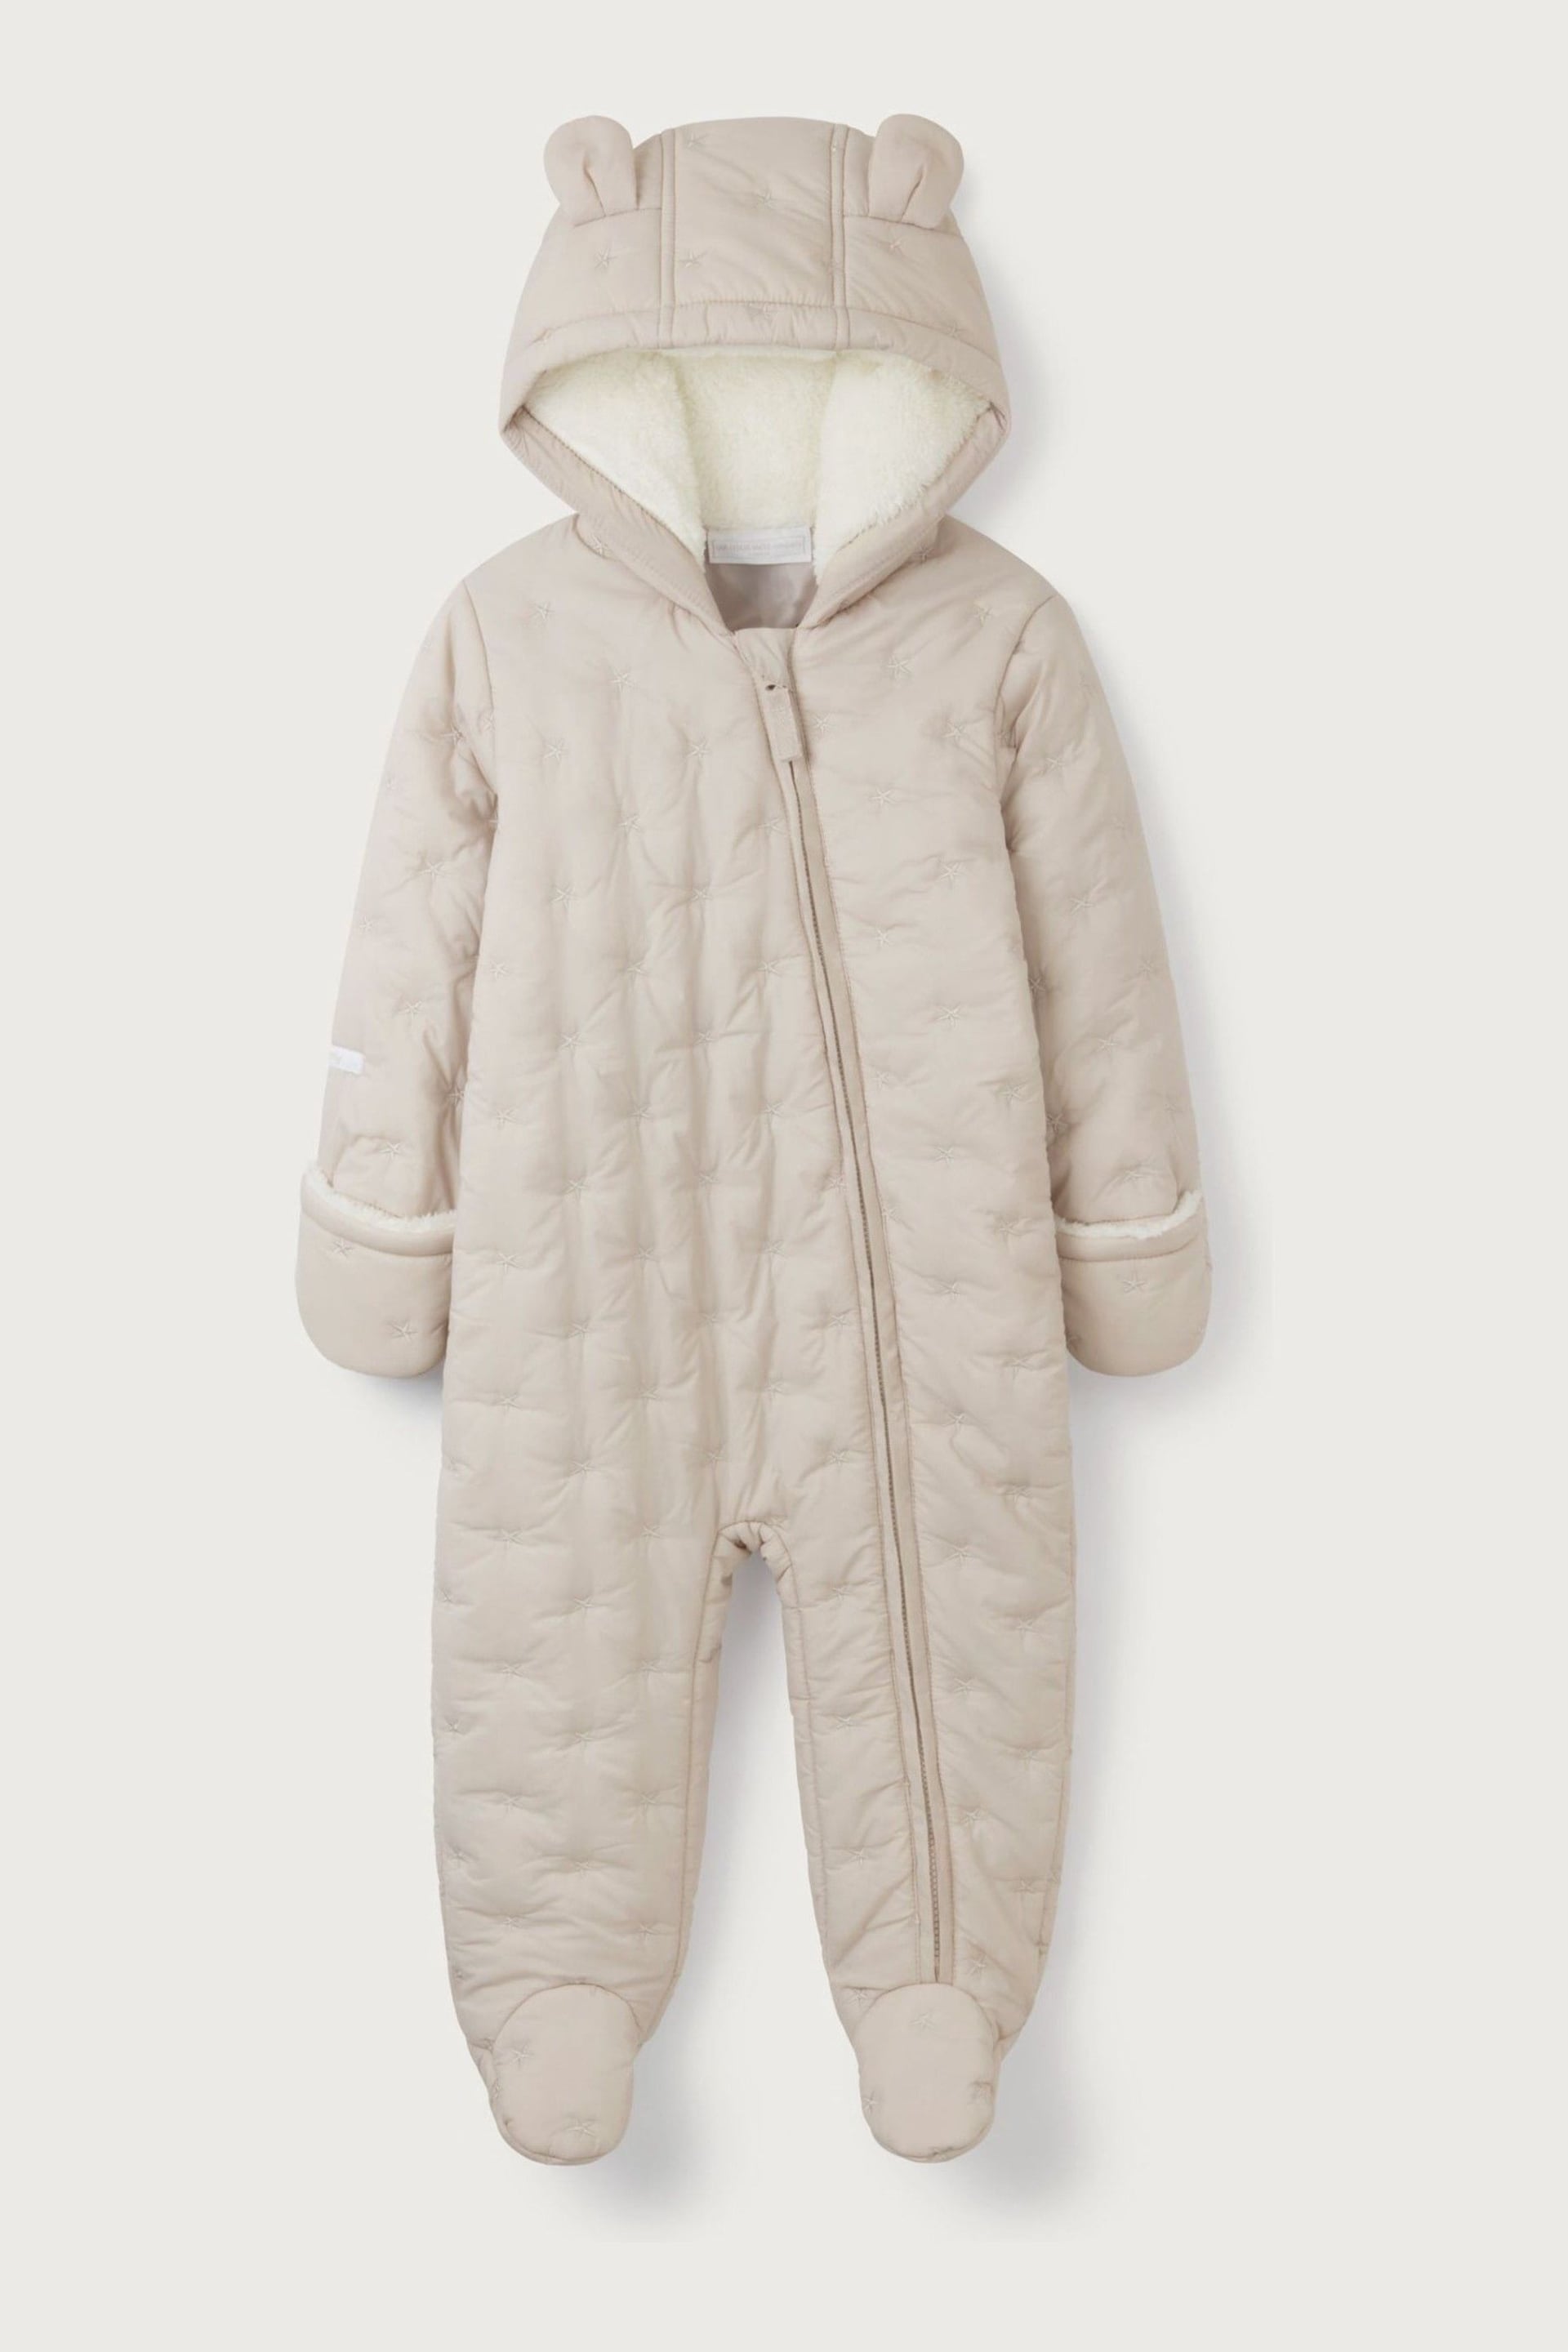 The White Company Natural Star Pebble Quilted Pramsuit - Image 5 of 6